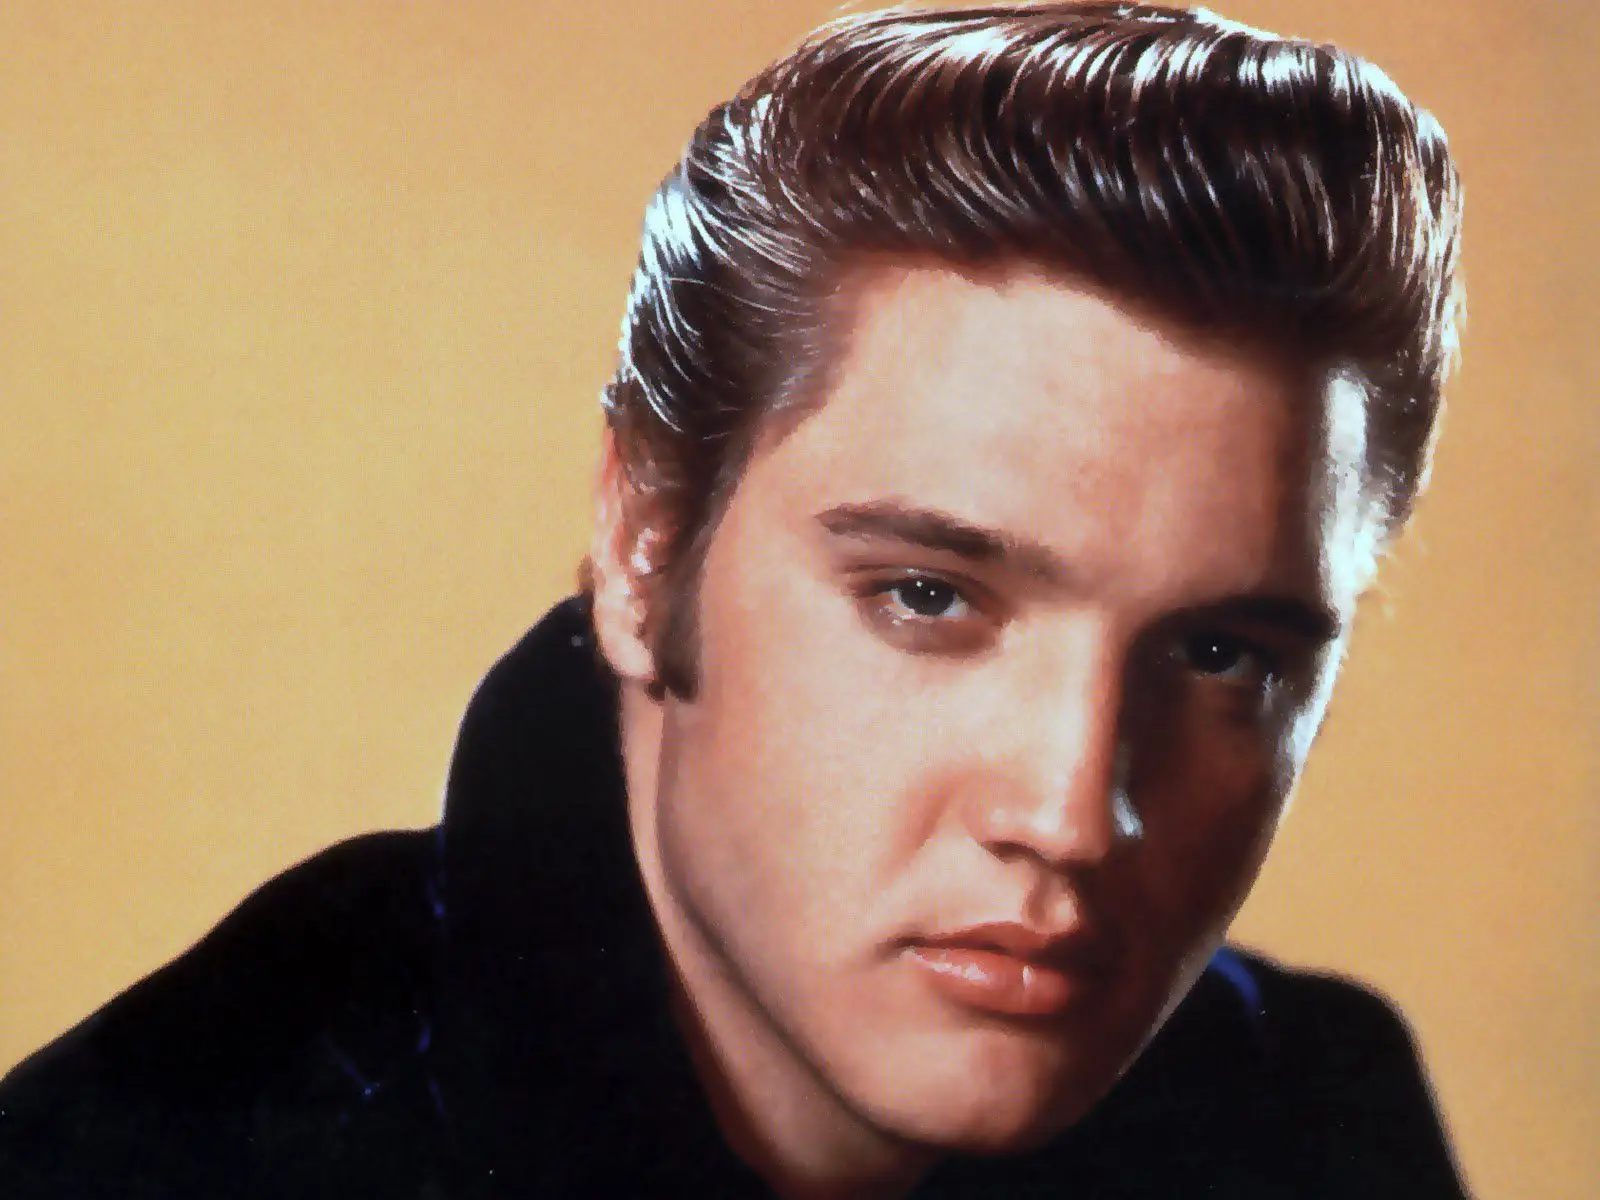 The Fascinating Life Story of Elvis Presley A Must-Watch Movie